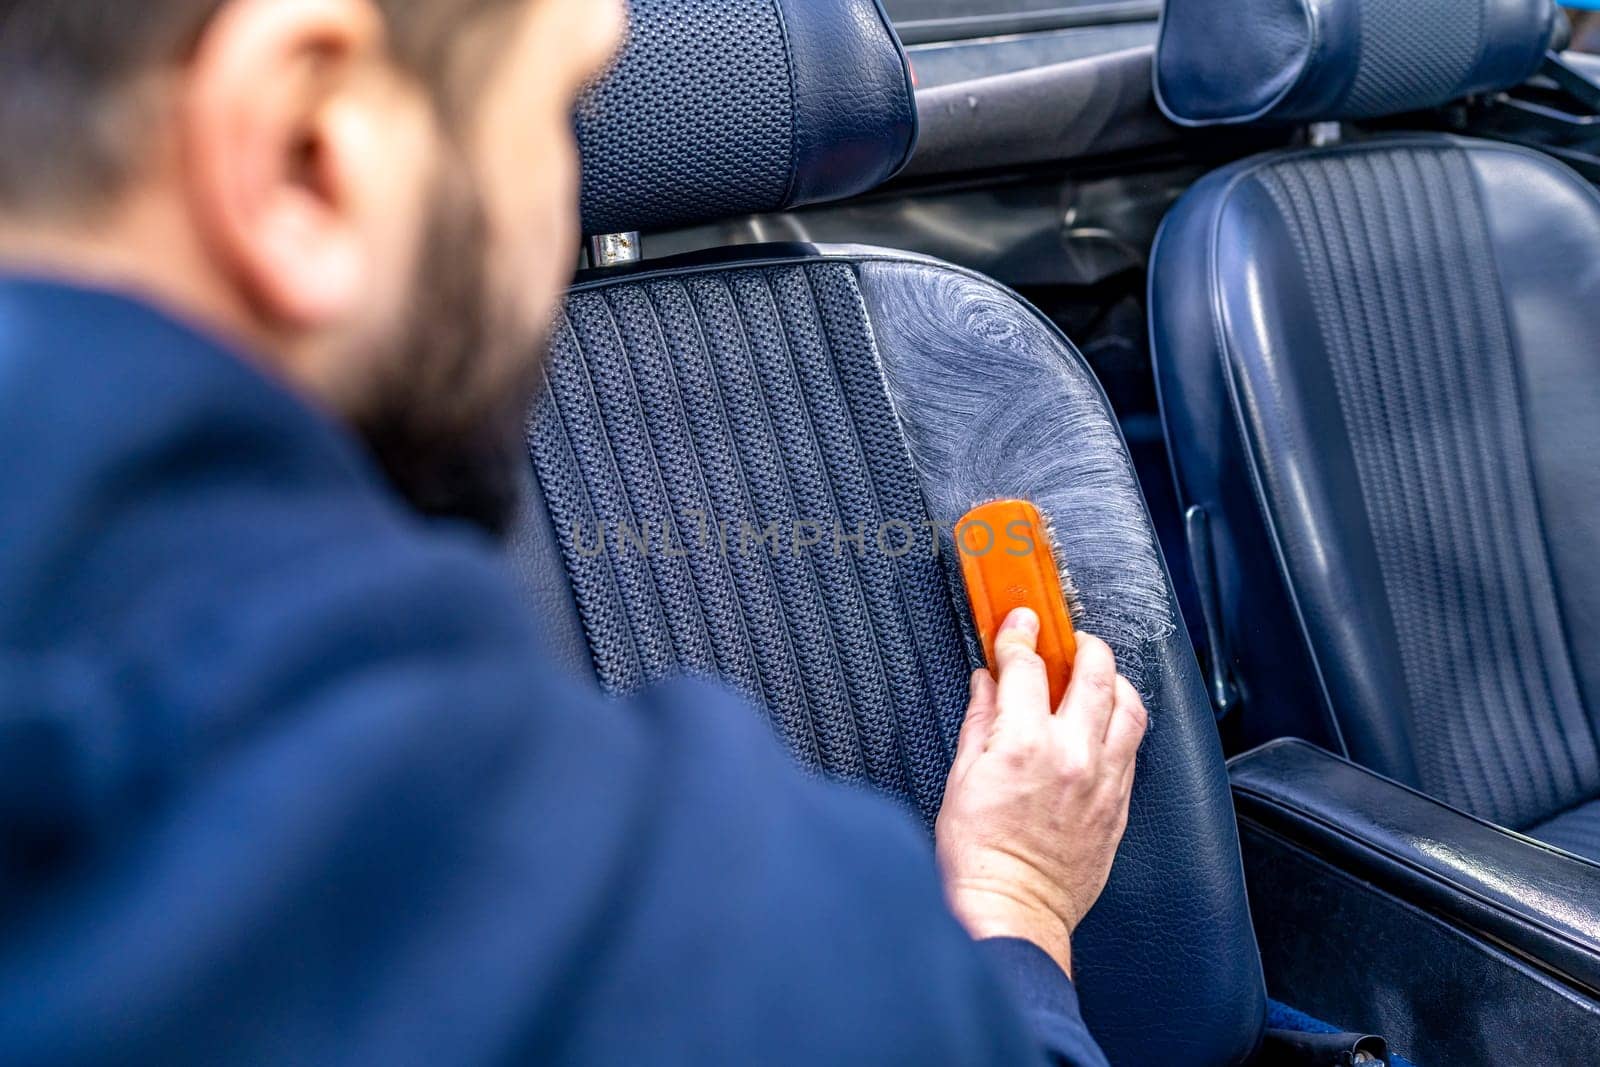 cleaning leather seats of luxury cars with the help of detergents and chemicals by Edophoto